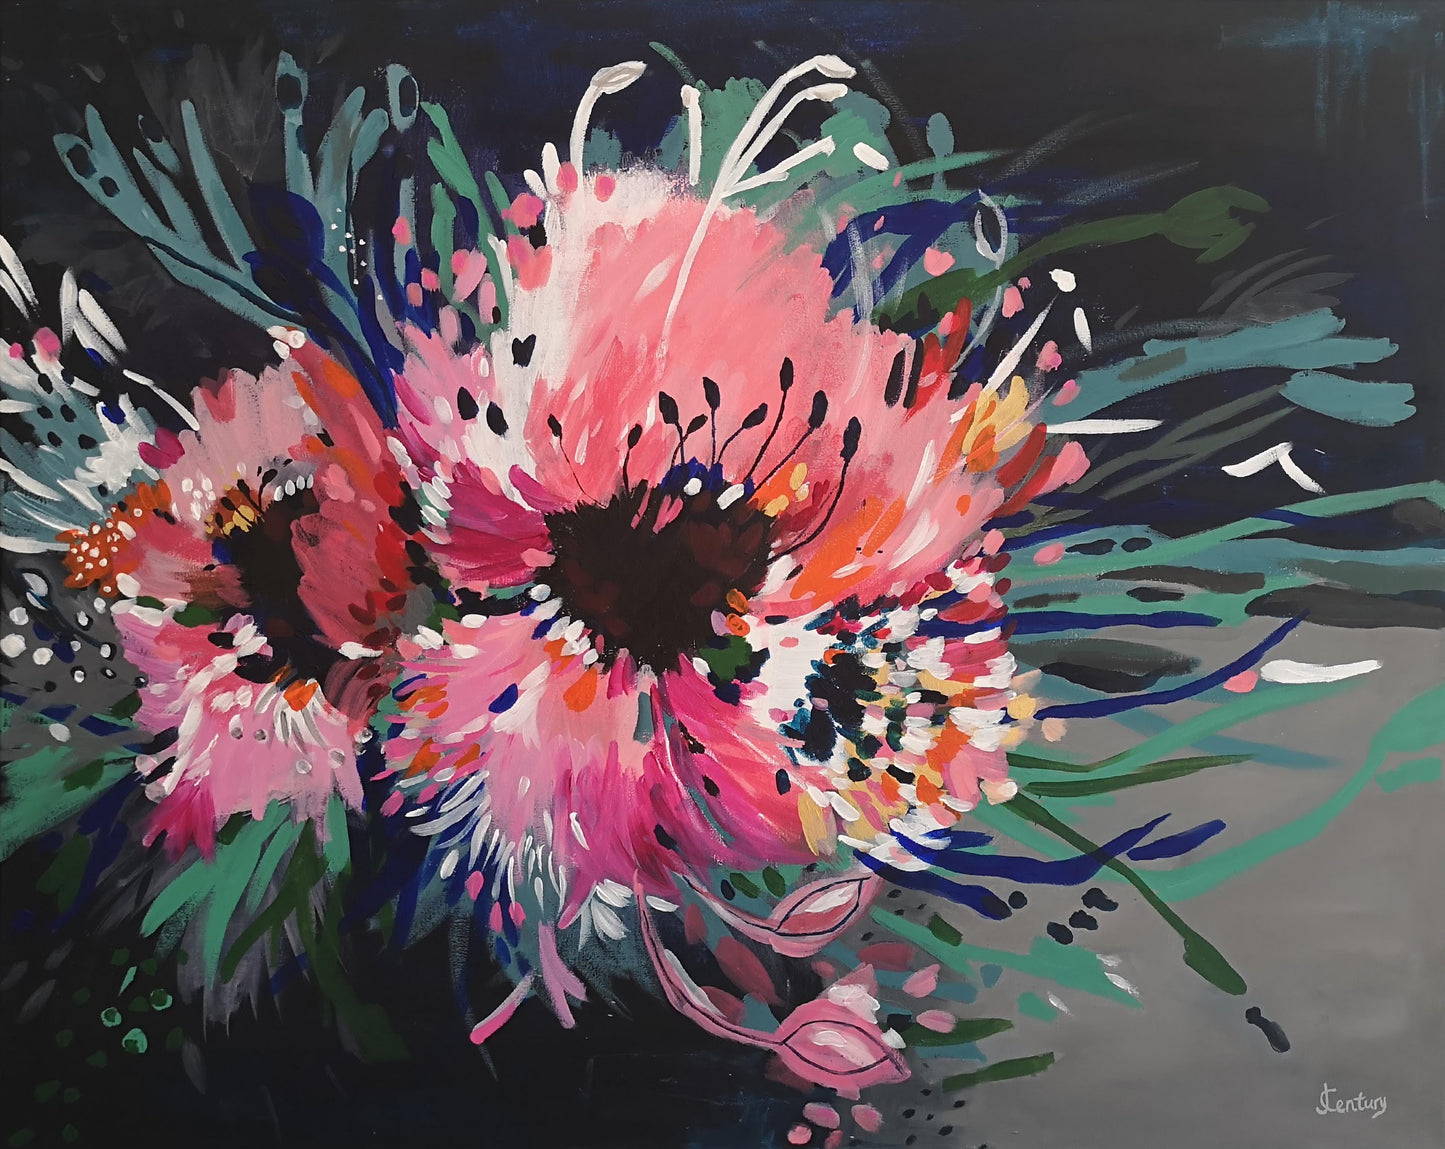 Abstract Flower Painting featuring two large bold pink blooms bursting on the page, with contrasting lines of blue, green and white extending out to add movement. Vibrant, bold and colourful original painting by Judy Century.